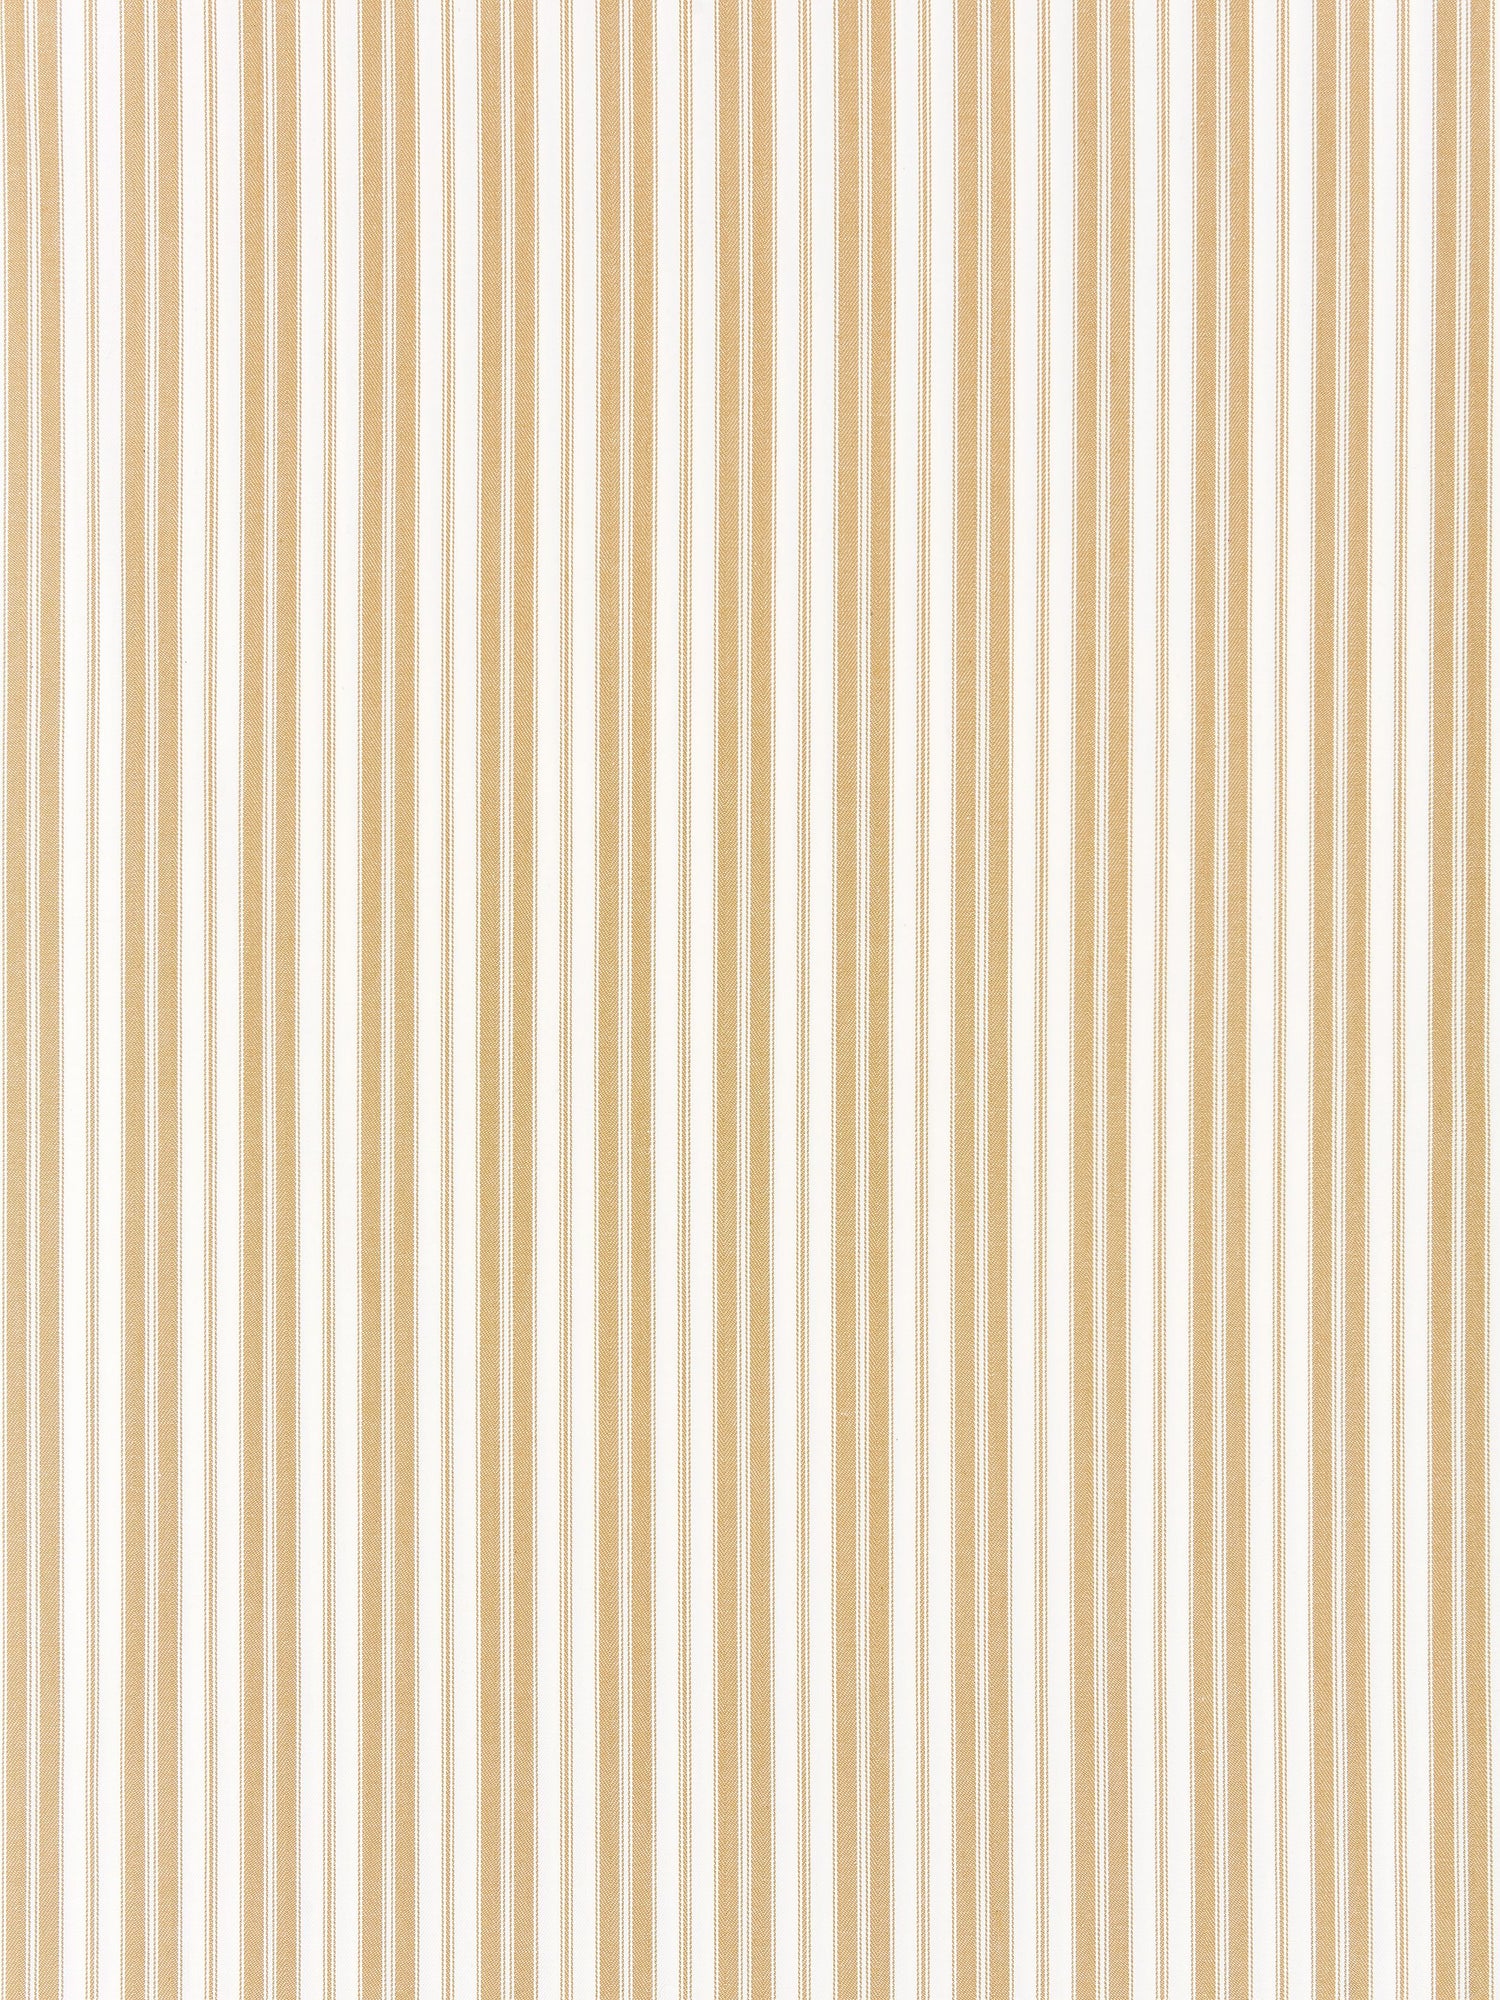 Devon Ticking Stripe fabric in camel color - pattern number SC 000227115 - by Scalamandre in the Scalamandre Fabrics Book 1 collection